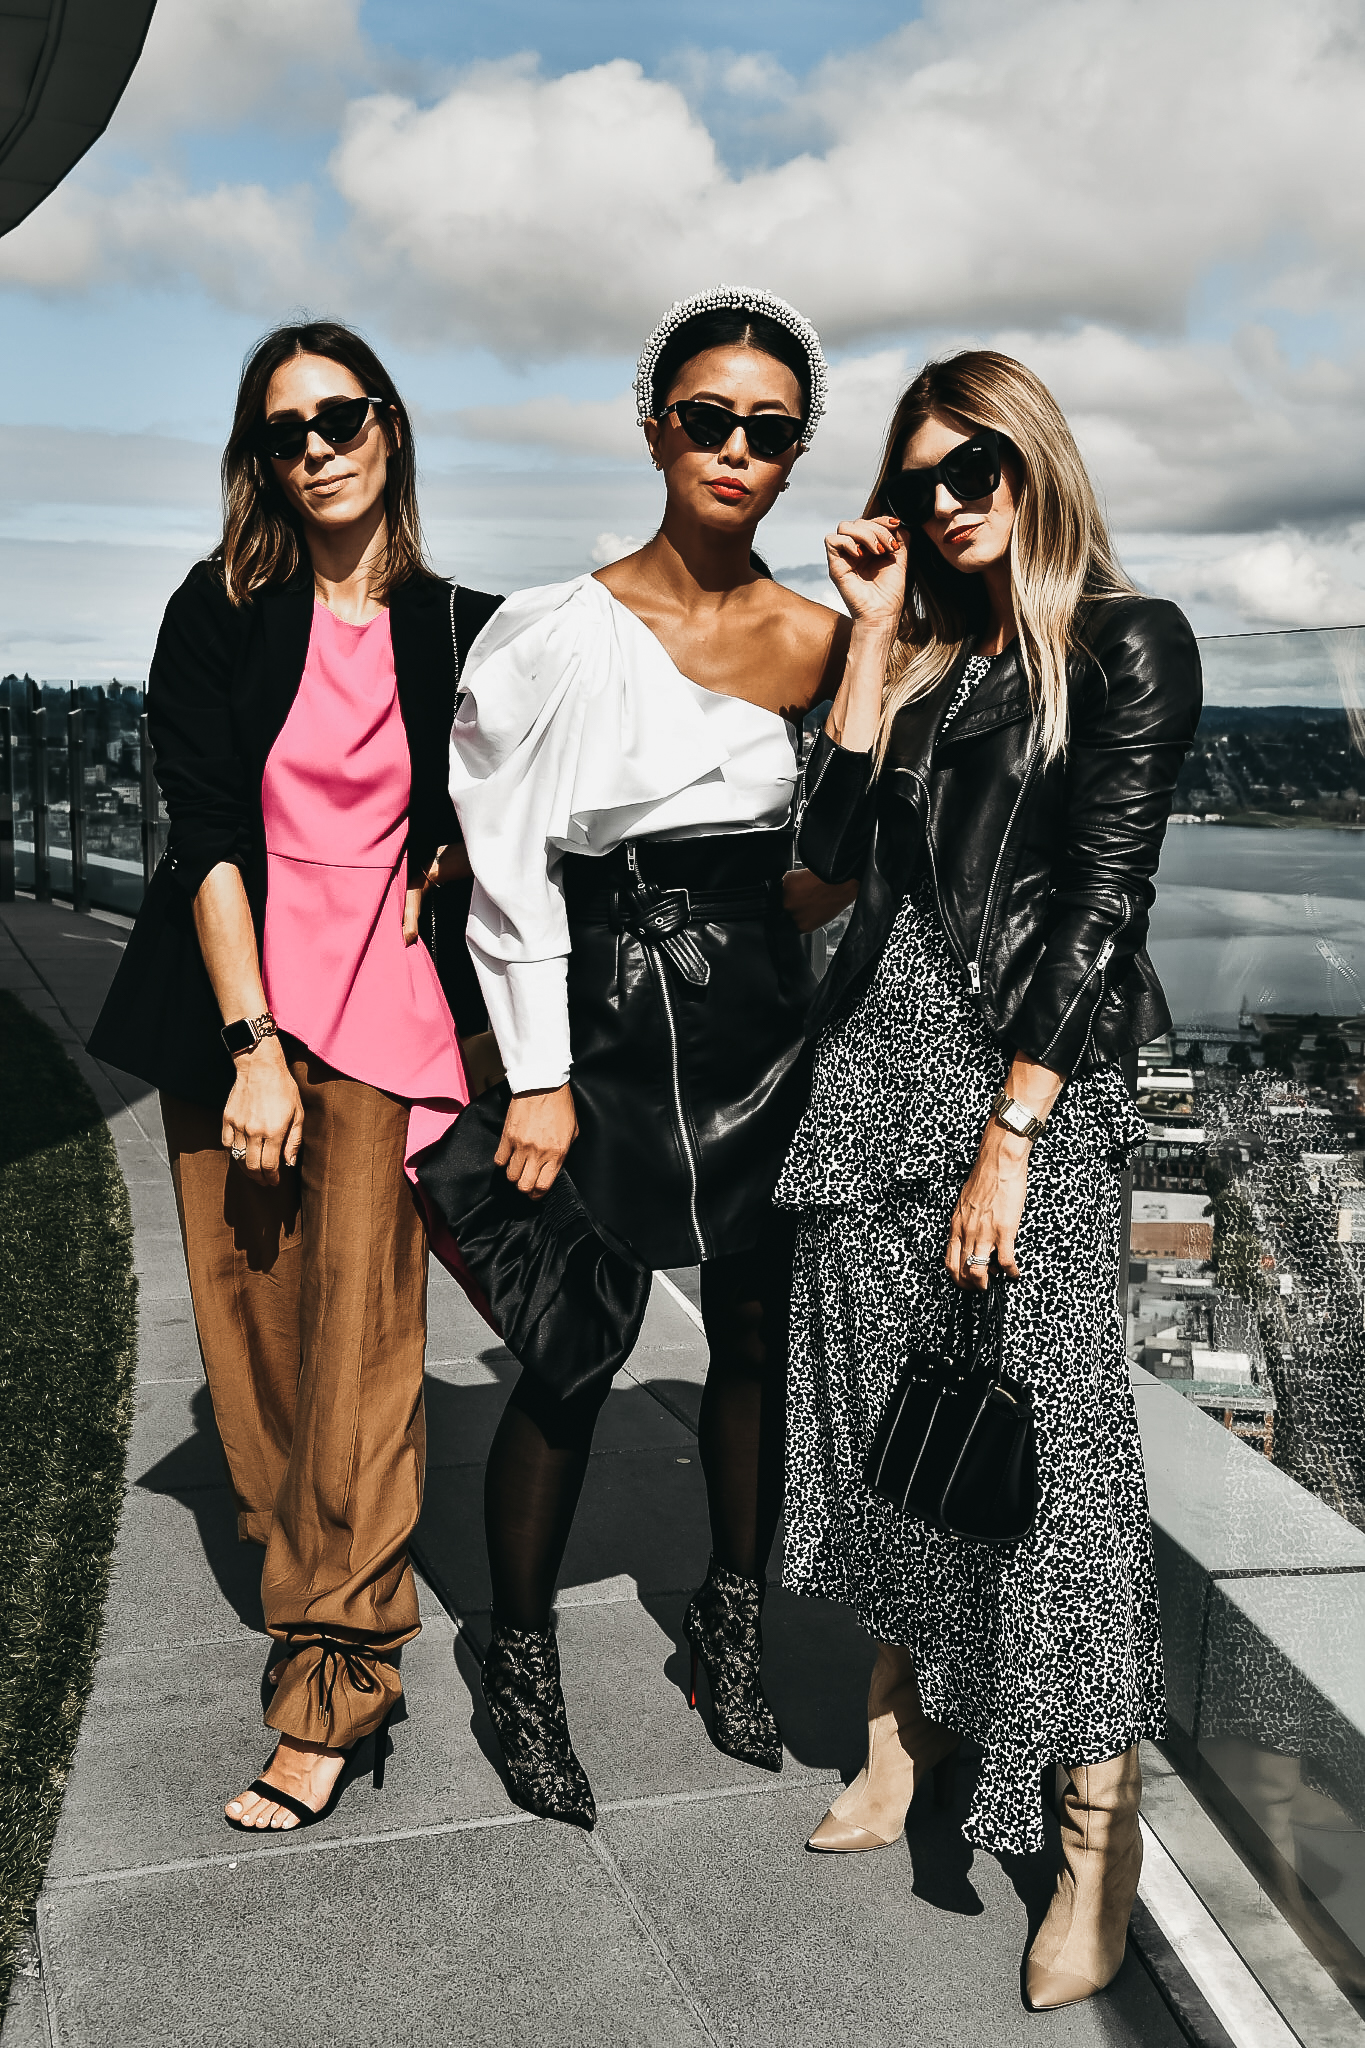 The Grey Edit - Stylelogue - October Trend Story - Seattle Bloggers - Asymmetrical Fashion Three Ways - Seattle Rooftop Views